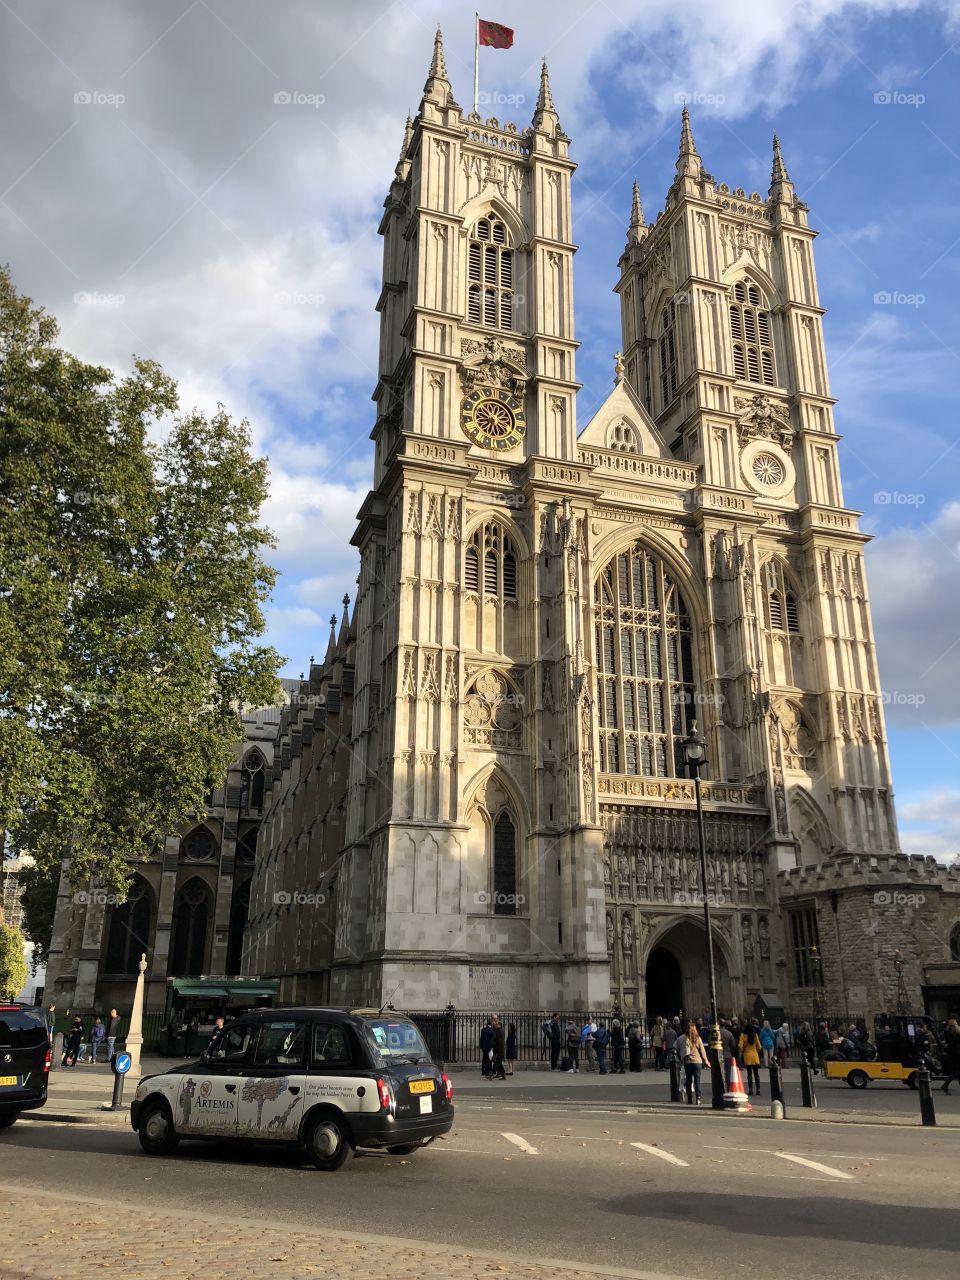 A sunlit view of London’s Westminster Abbey, the famous burial site of many noted Englishmen and more recently the site of the wedding between Prince William and Kate Middleton.  